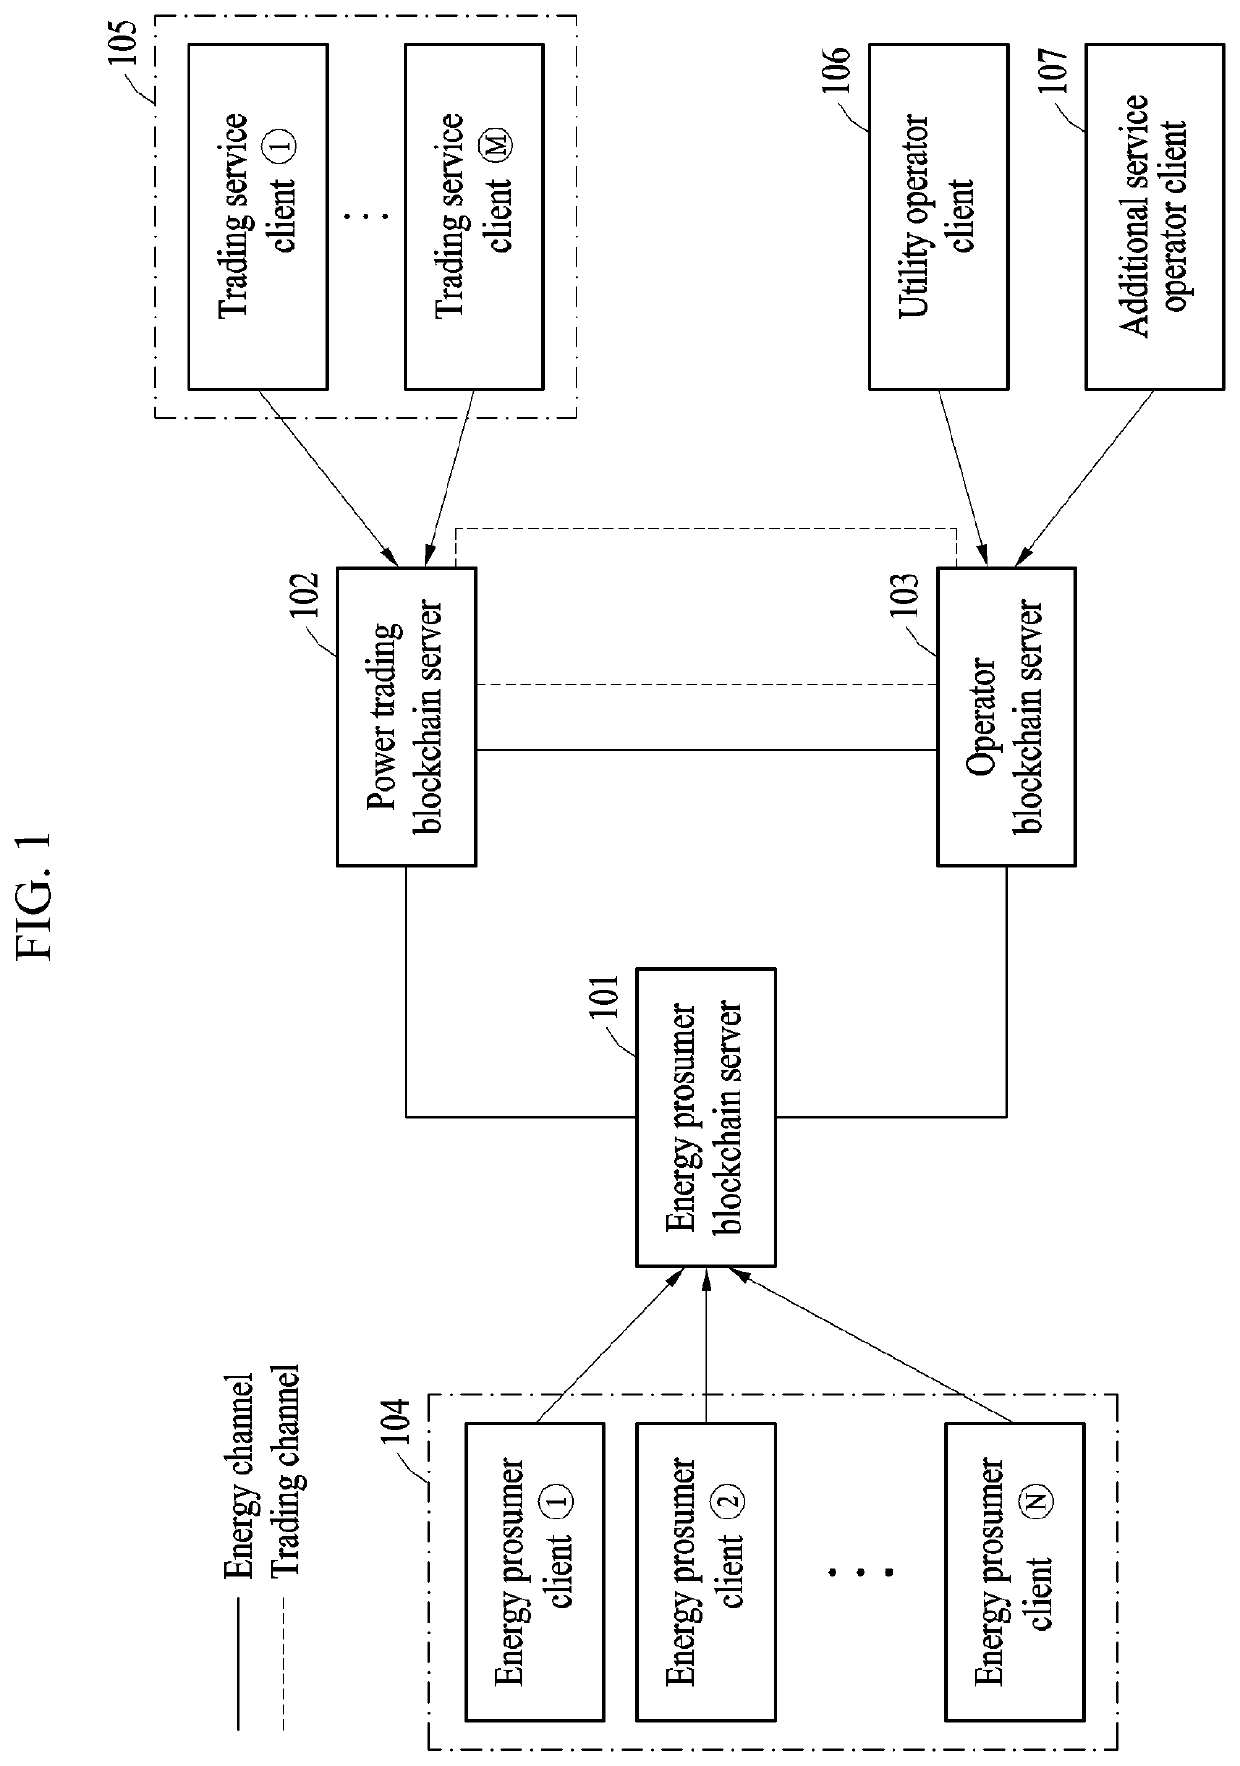 Energy trading system and method for performing energy trading between blockchain-based servers